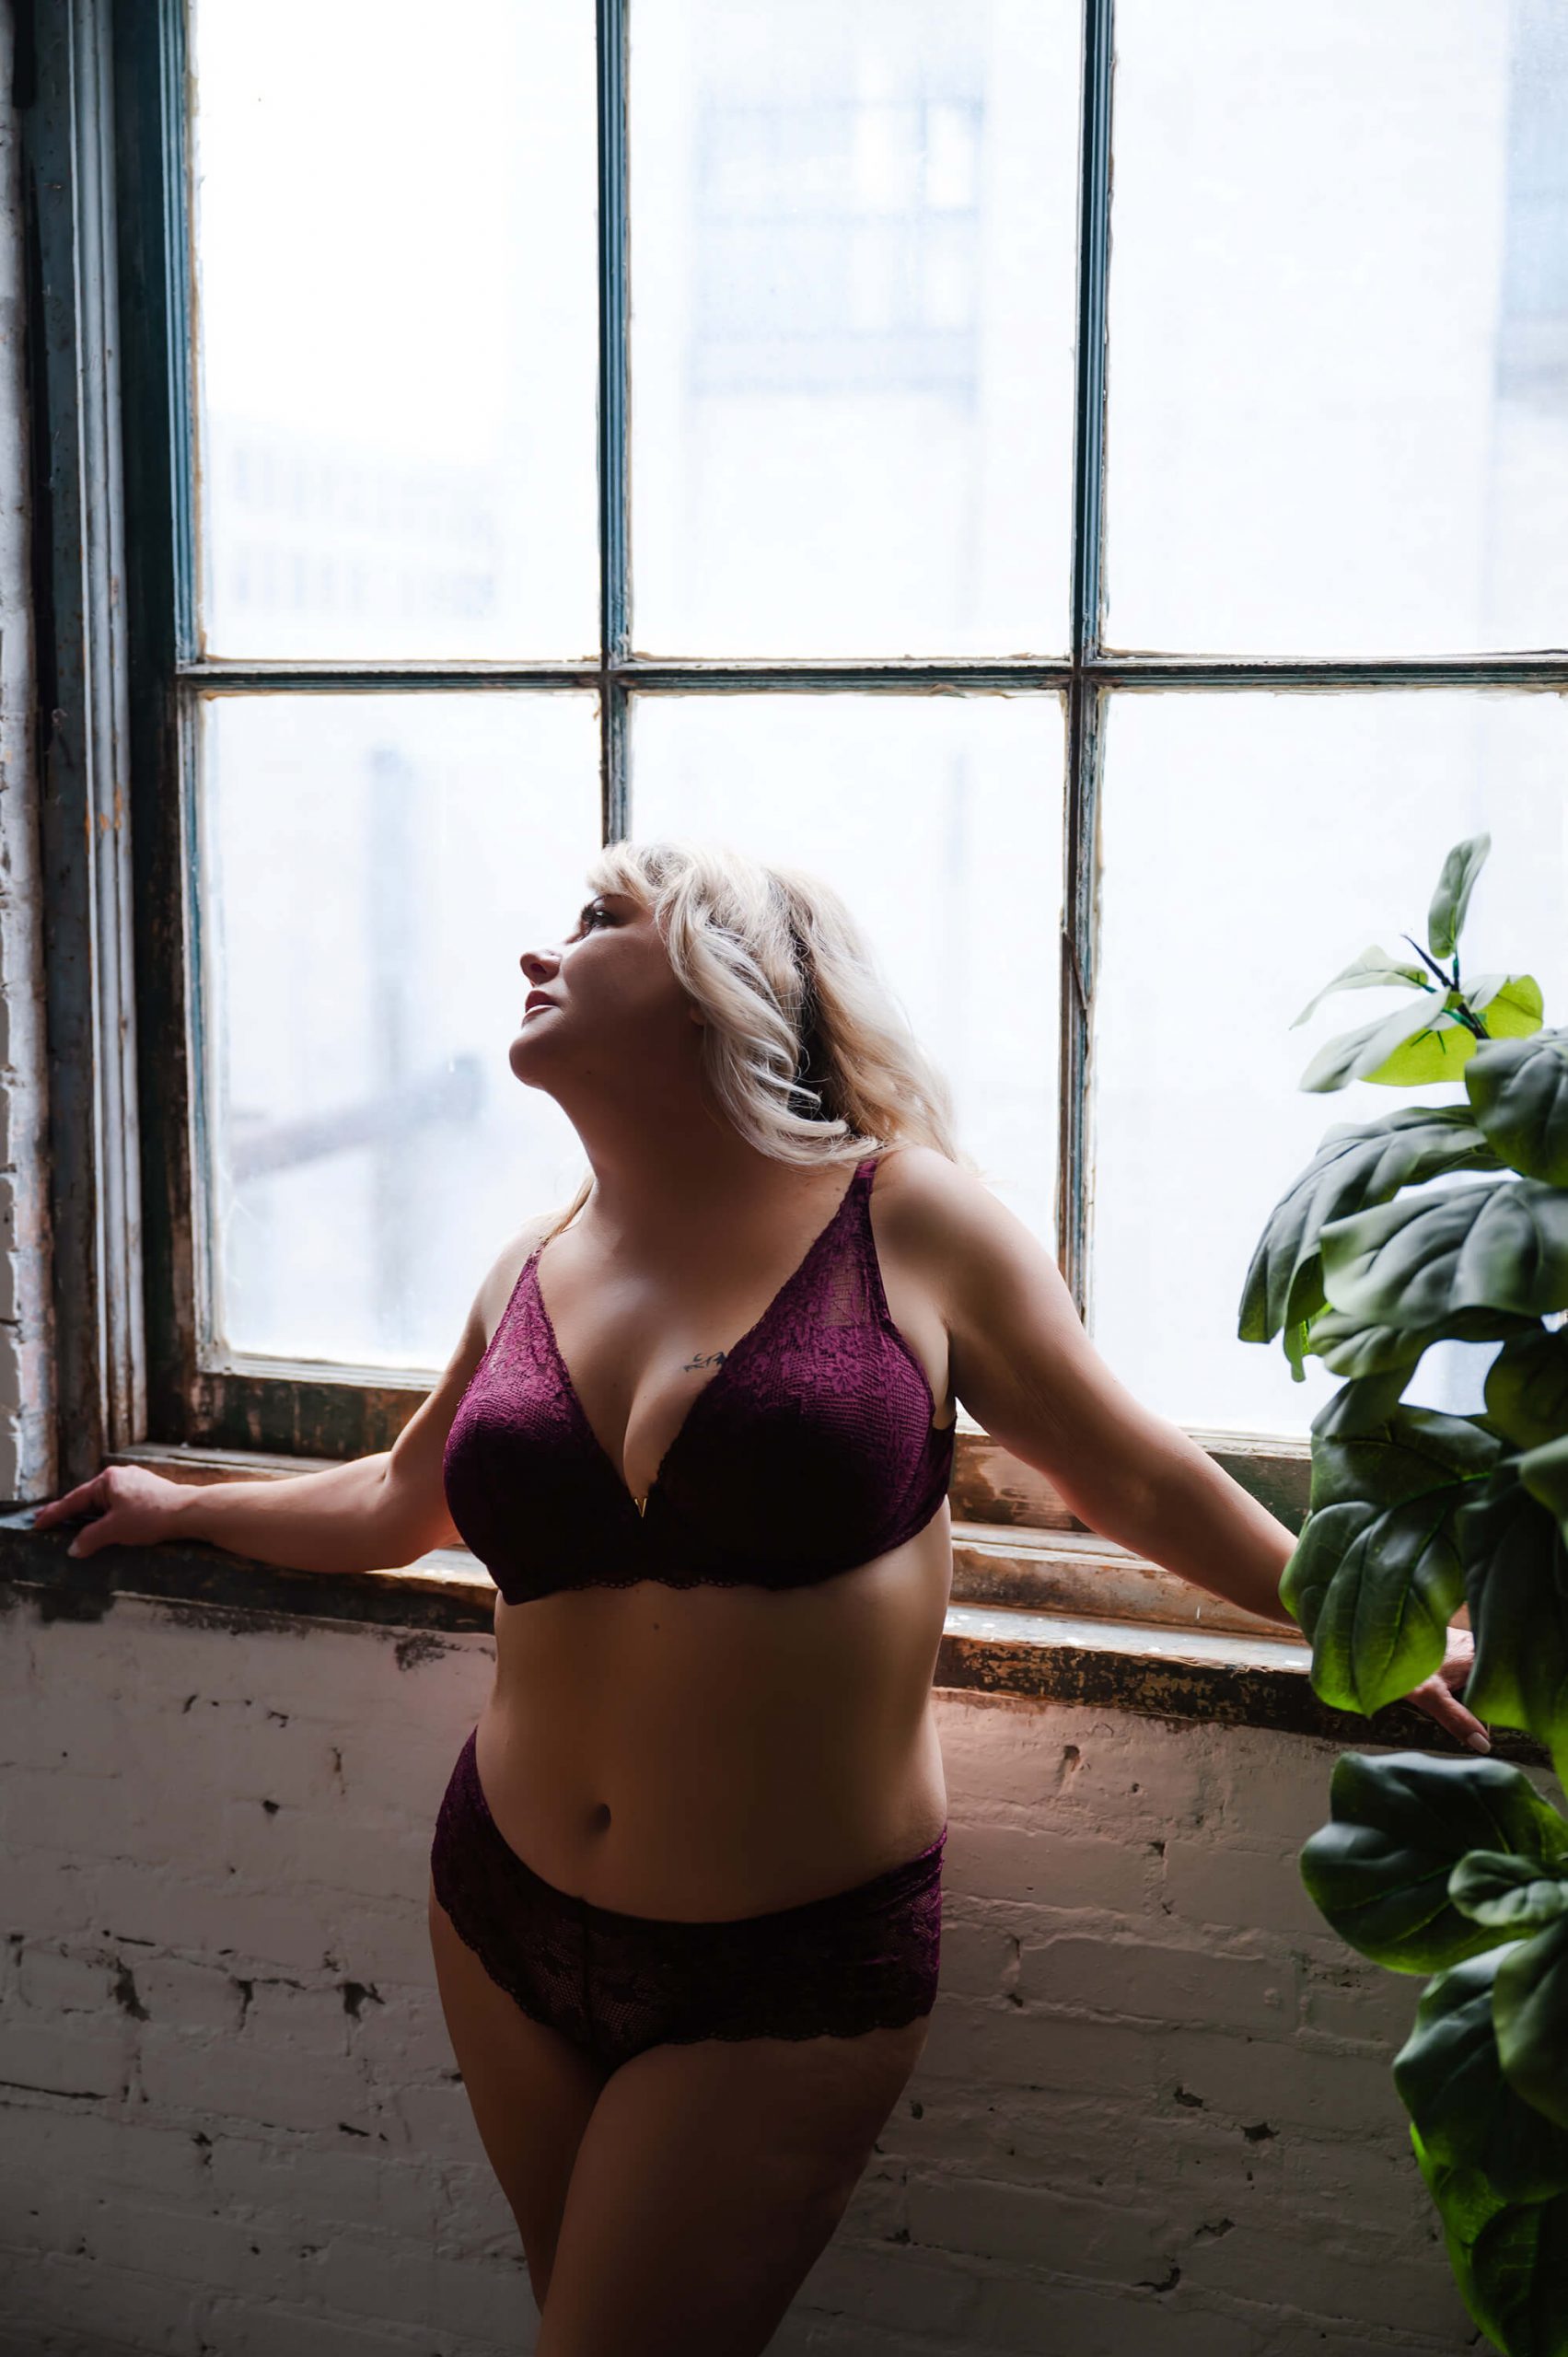 Is Maternity Boudoir Photography Really A Thing? - Boudoir Photography NYC